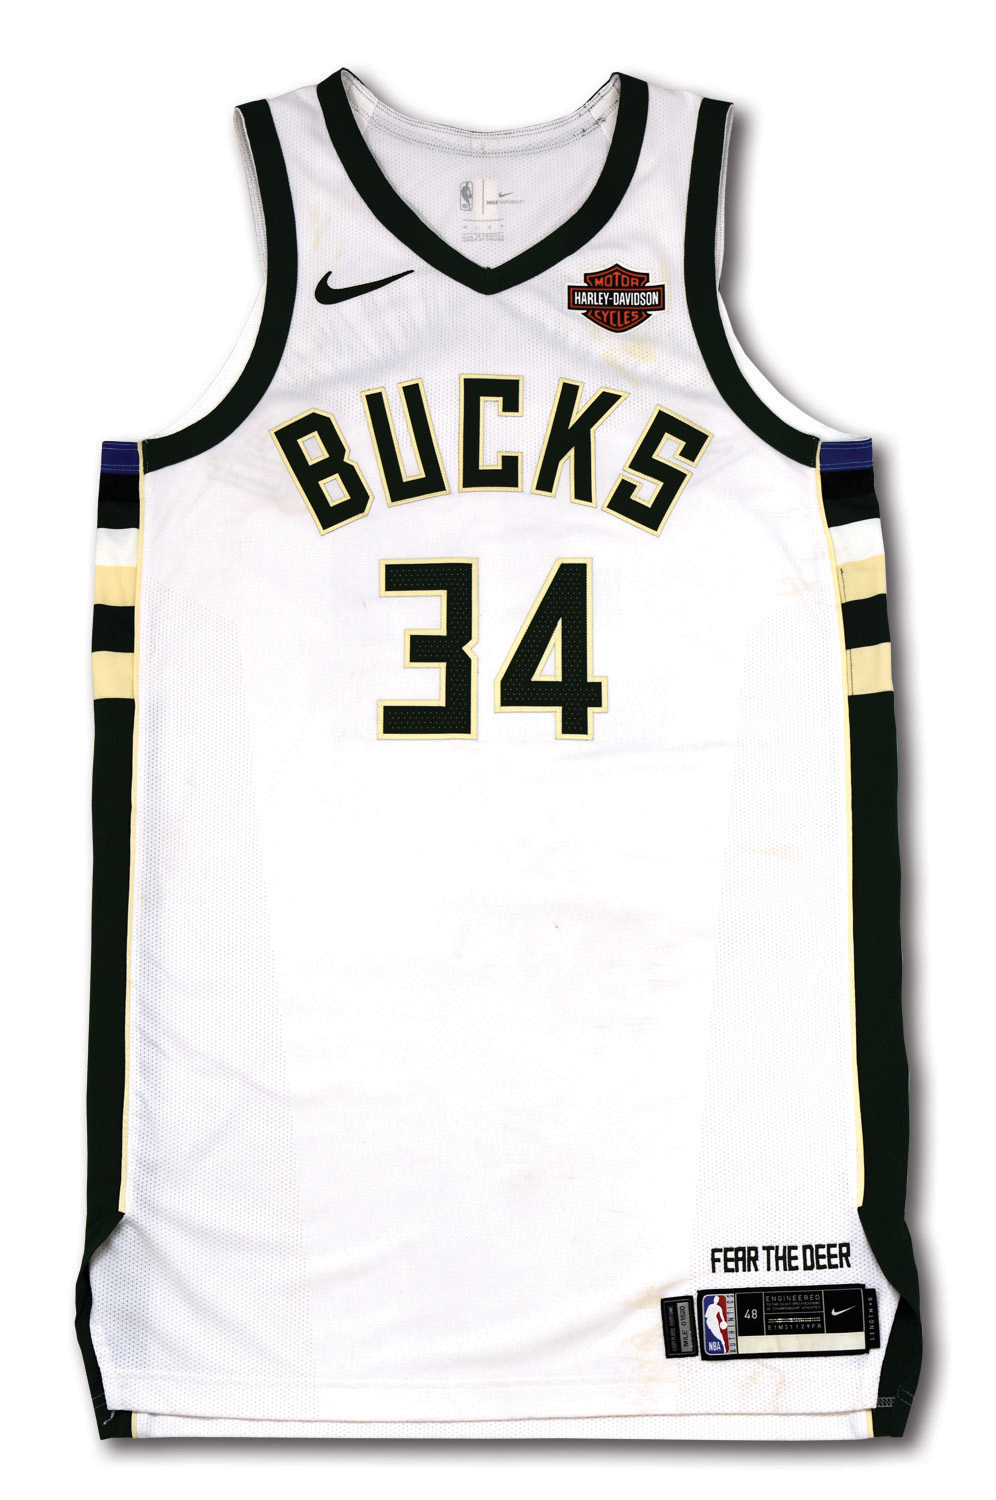 Sold at Auction: Giannis Antetokounmpo Signed Jersey